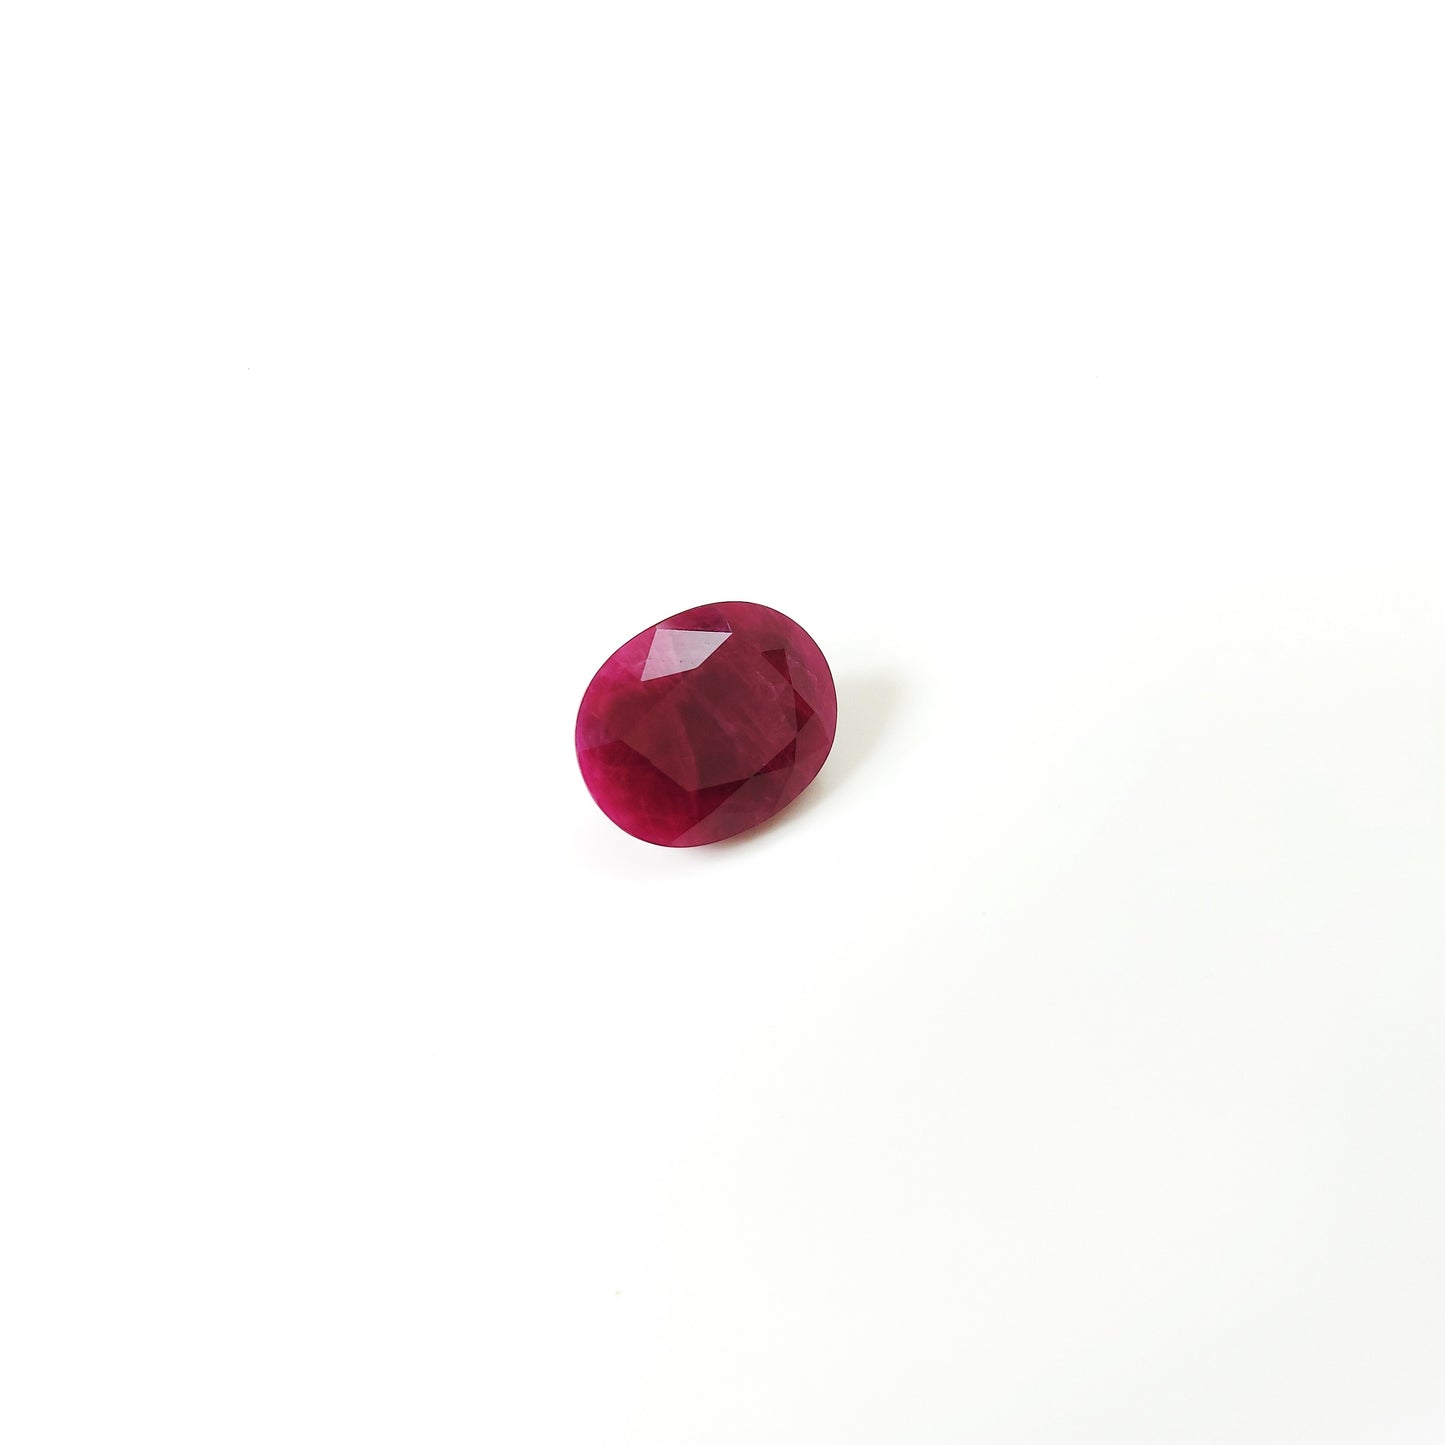 100% Natural Burma Heated Ruby Oval | 22.70cts